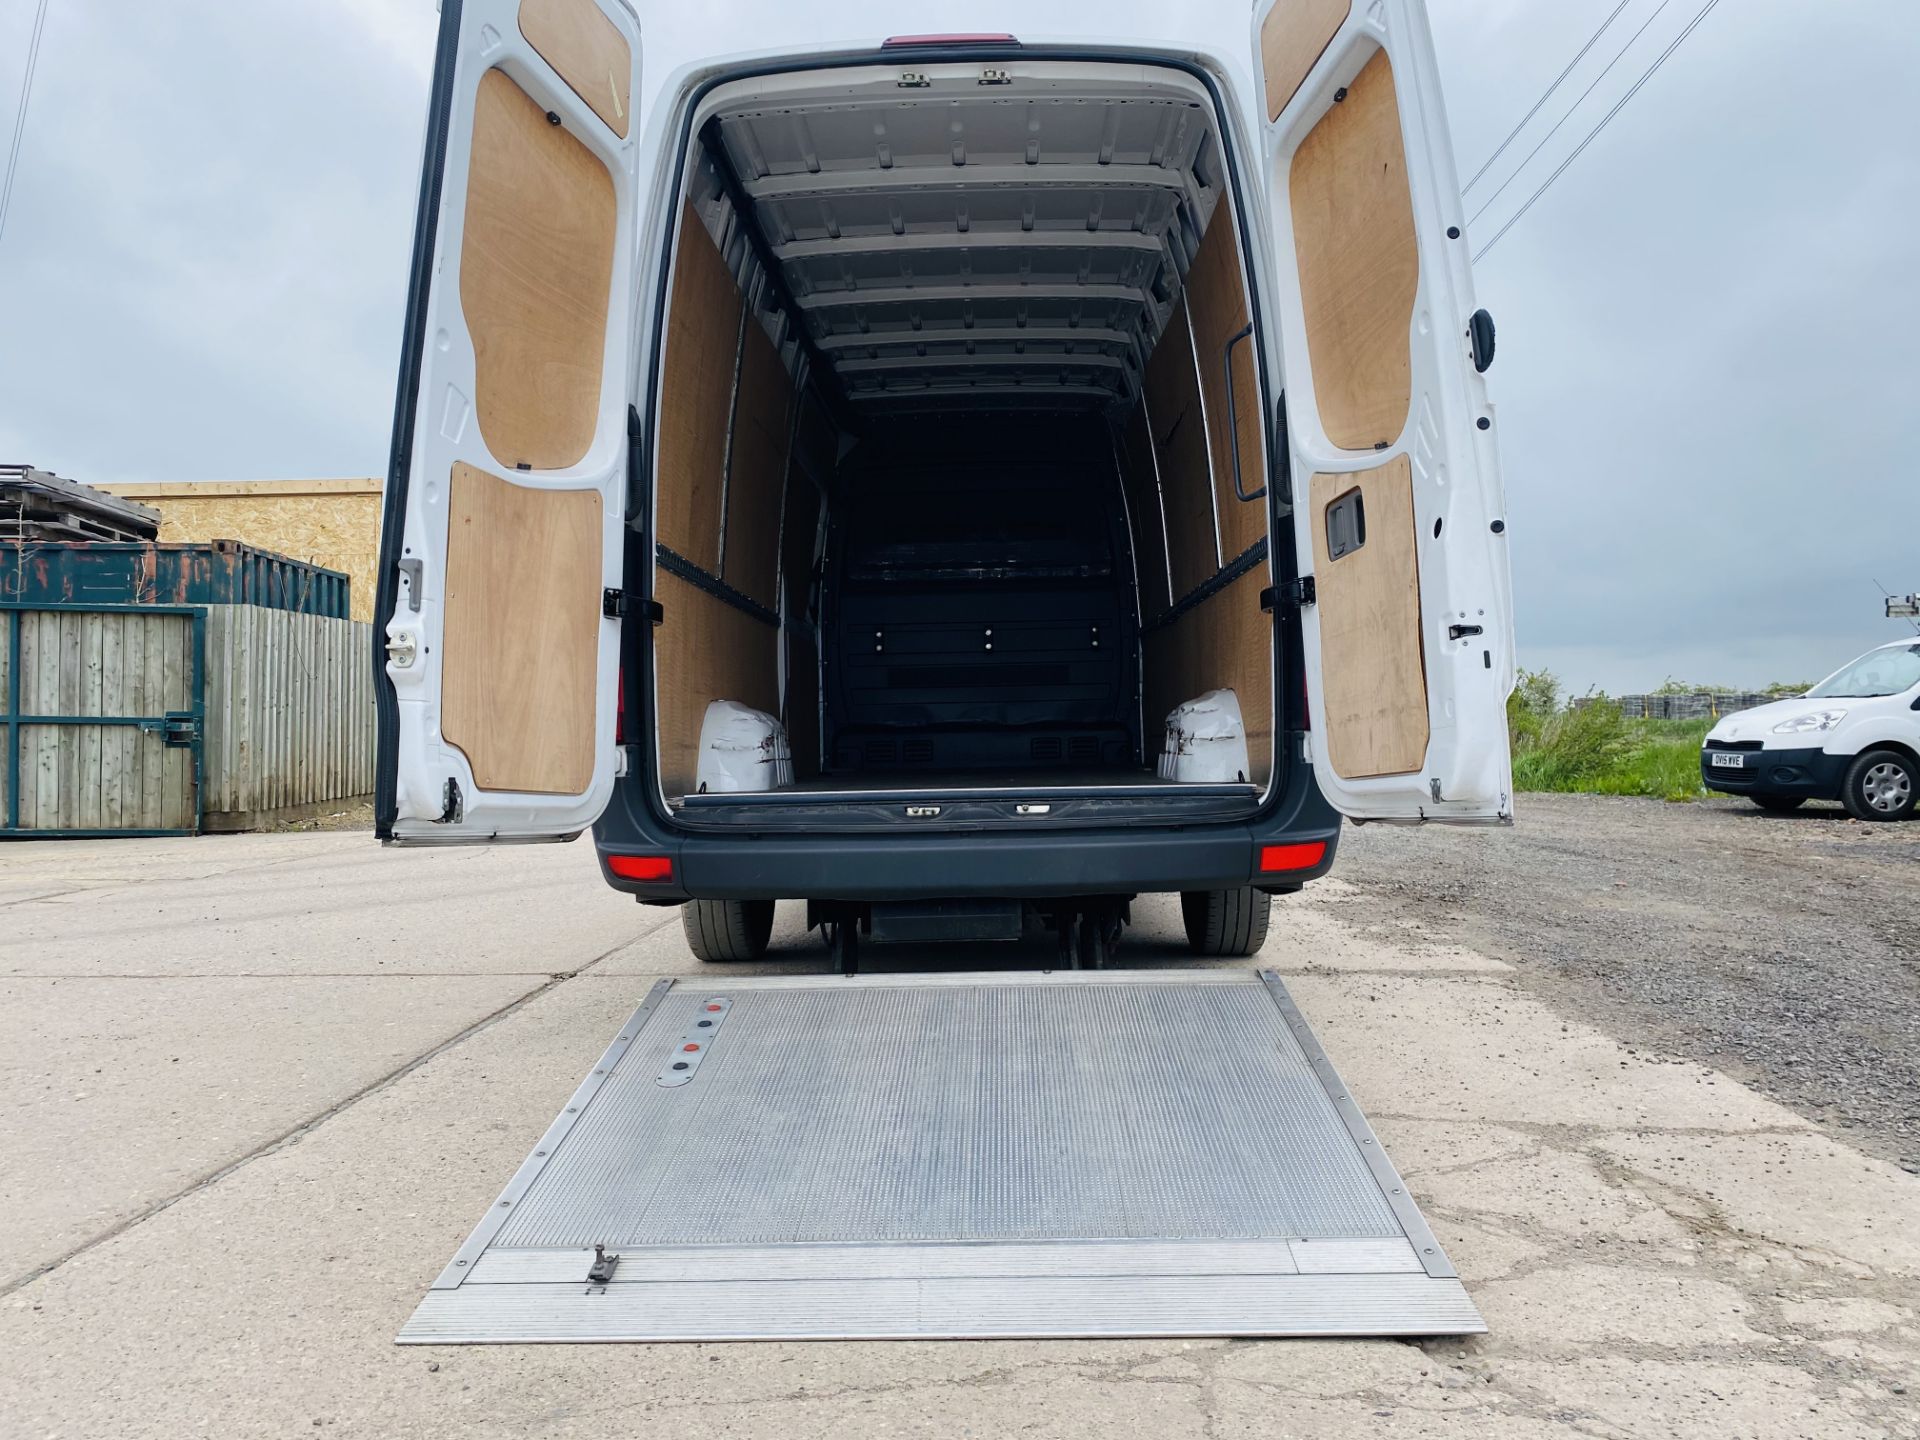 MERCEDES SPRINTER 314CDI "LWB" HIGH ROOF WITH FULL ELECTRIC TAIL-LIFT - 2018 MODEL - 1 OWNER - FSH - Image 8 of 18